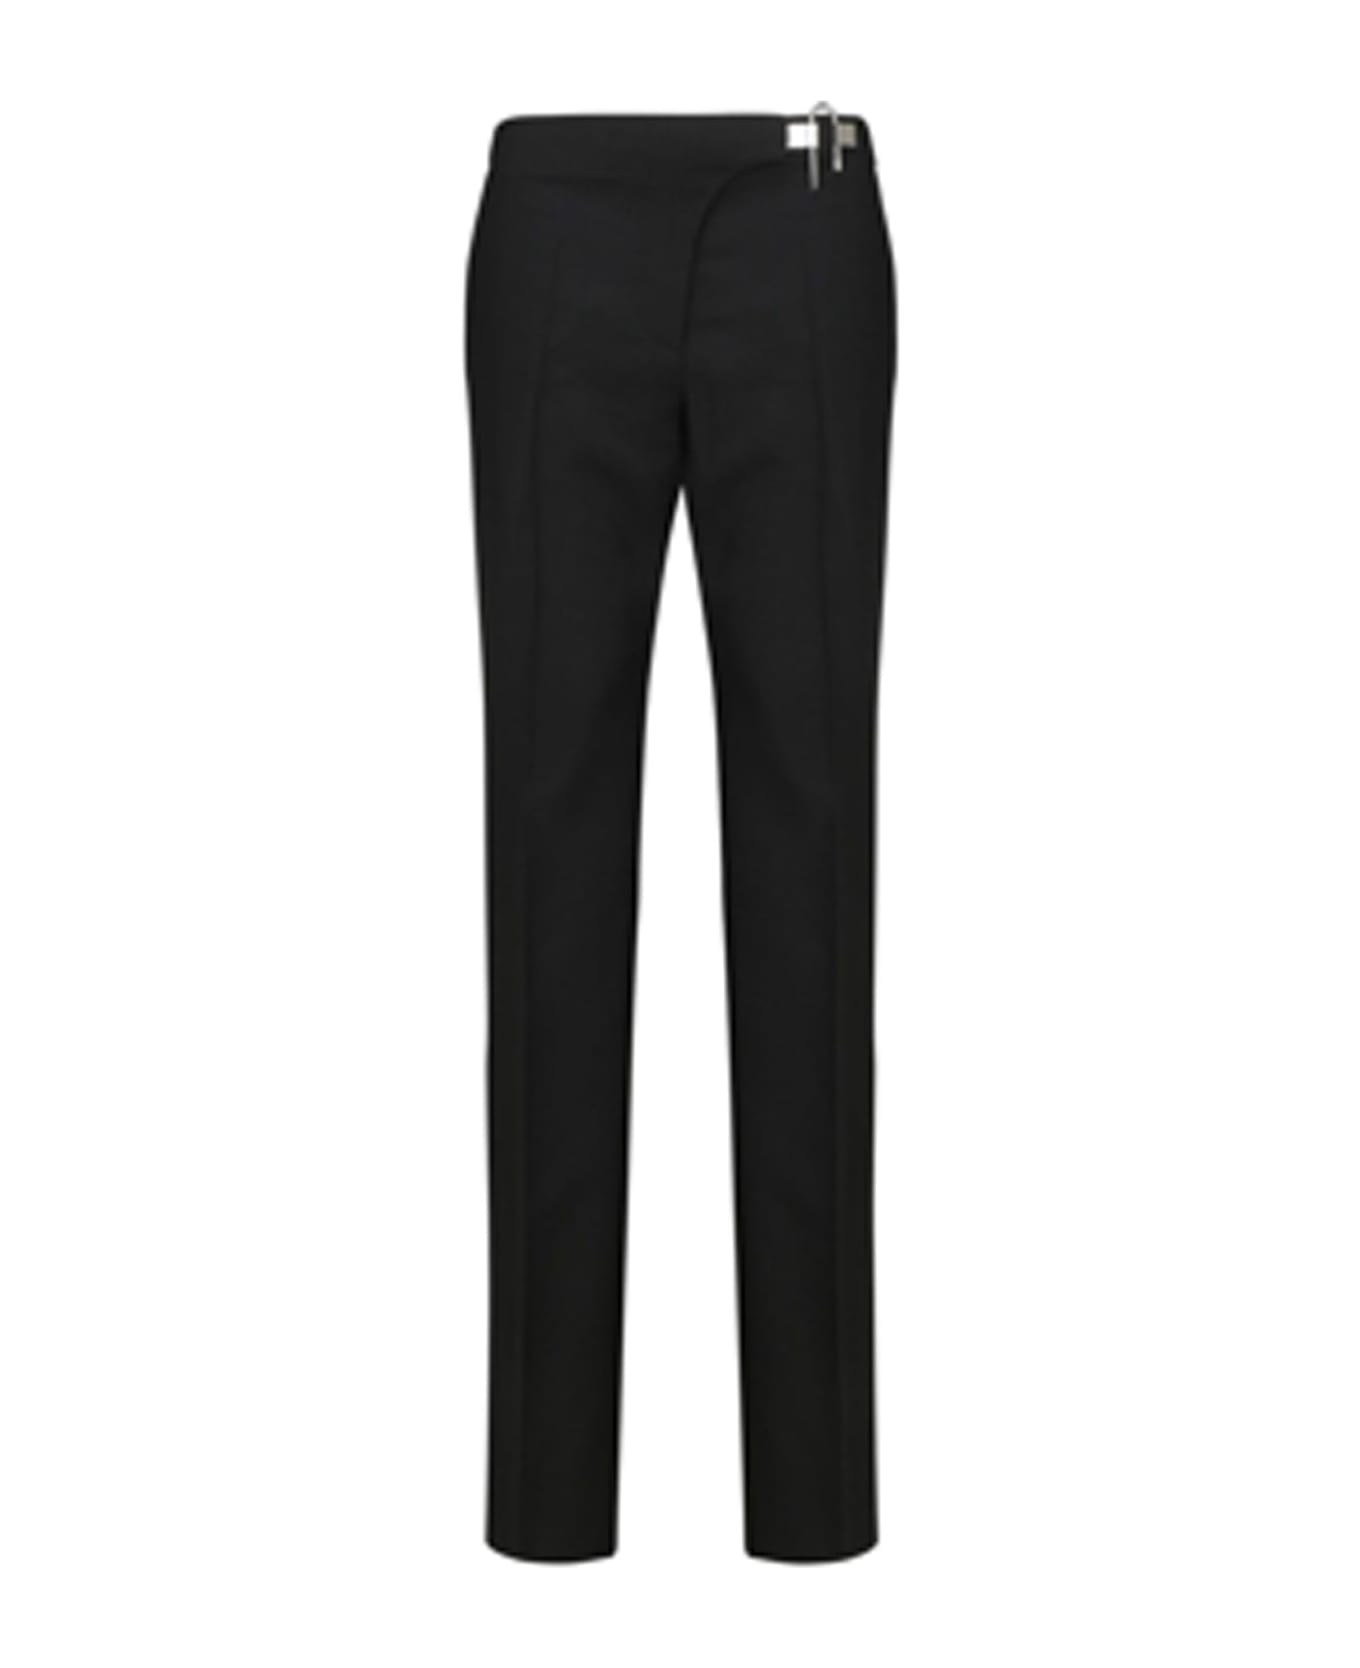 Givenchy Cady Trousers - Black ボトムス